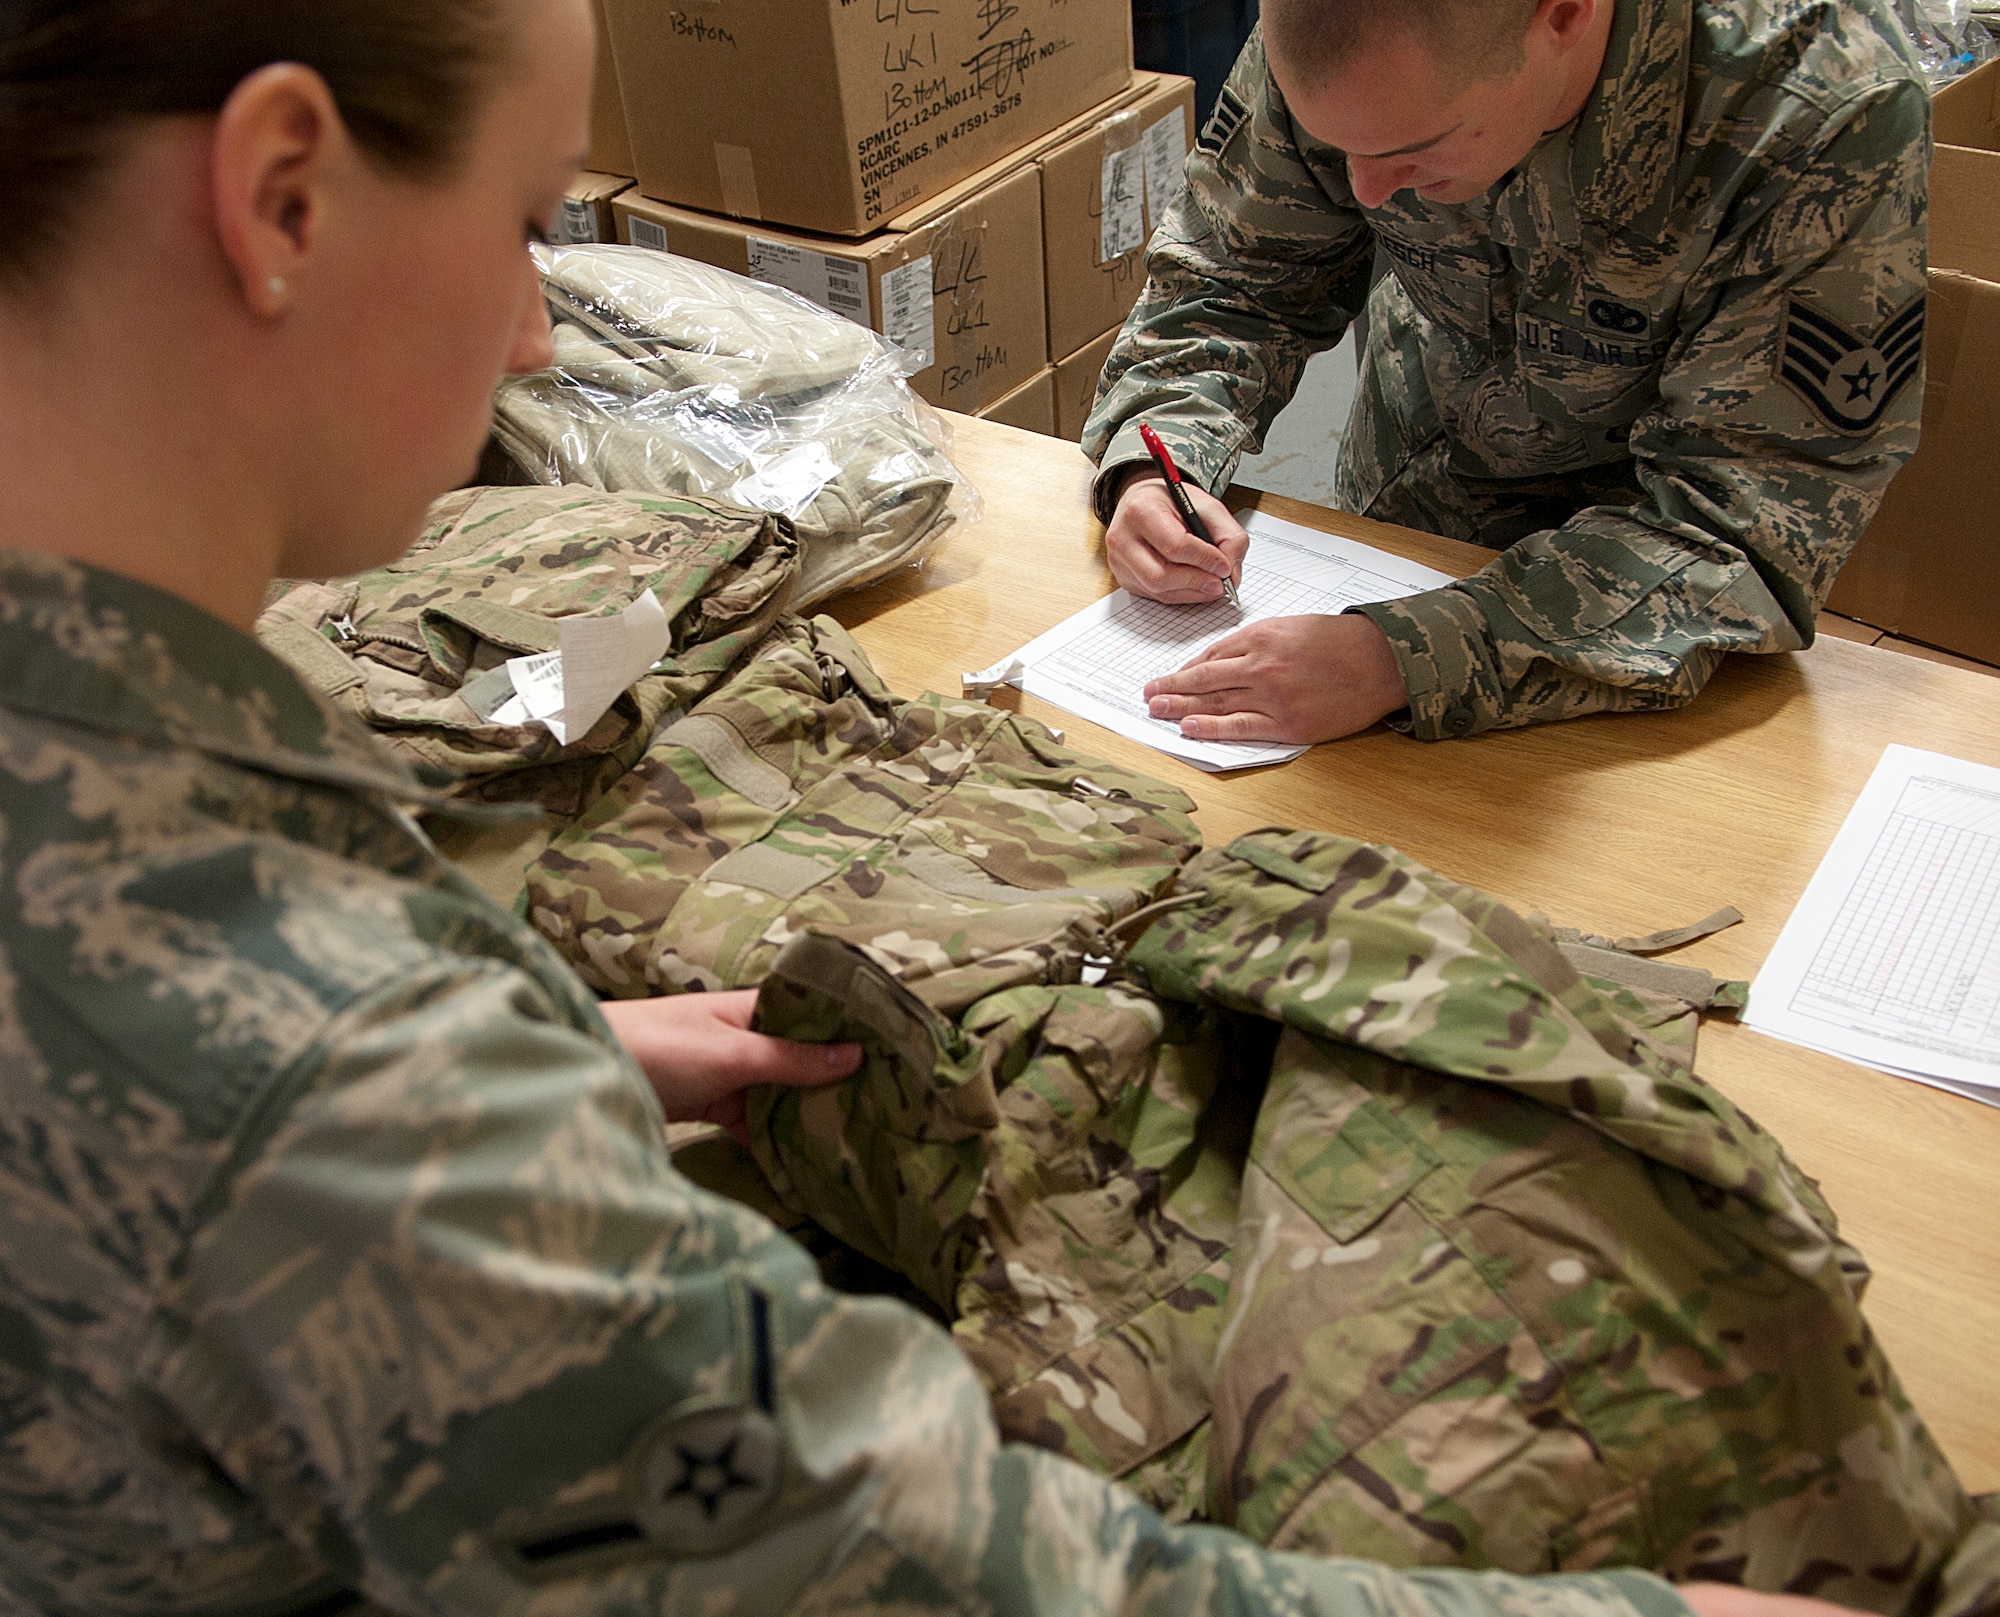 Airman Chelsea Kidman, 790th Missile Security Forces Squadron Security Support Team, inspects her new uniforms as Staff Sgt. Richard Roesch, 90th Security Support Squadron assistant NCO-in-charge of supply, checks the gear off a list Feb. 2, 2015, in the Peacekeeper High Bay on F.E. Warren Air Force Base, Wyo. The new uniform’s design helps defenders blend in to the operating environment of F.E. Warren and the missile complex. (U.S. Air Force photo by Airman 1st Class Brandon Valle) 